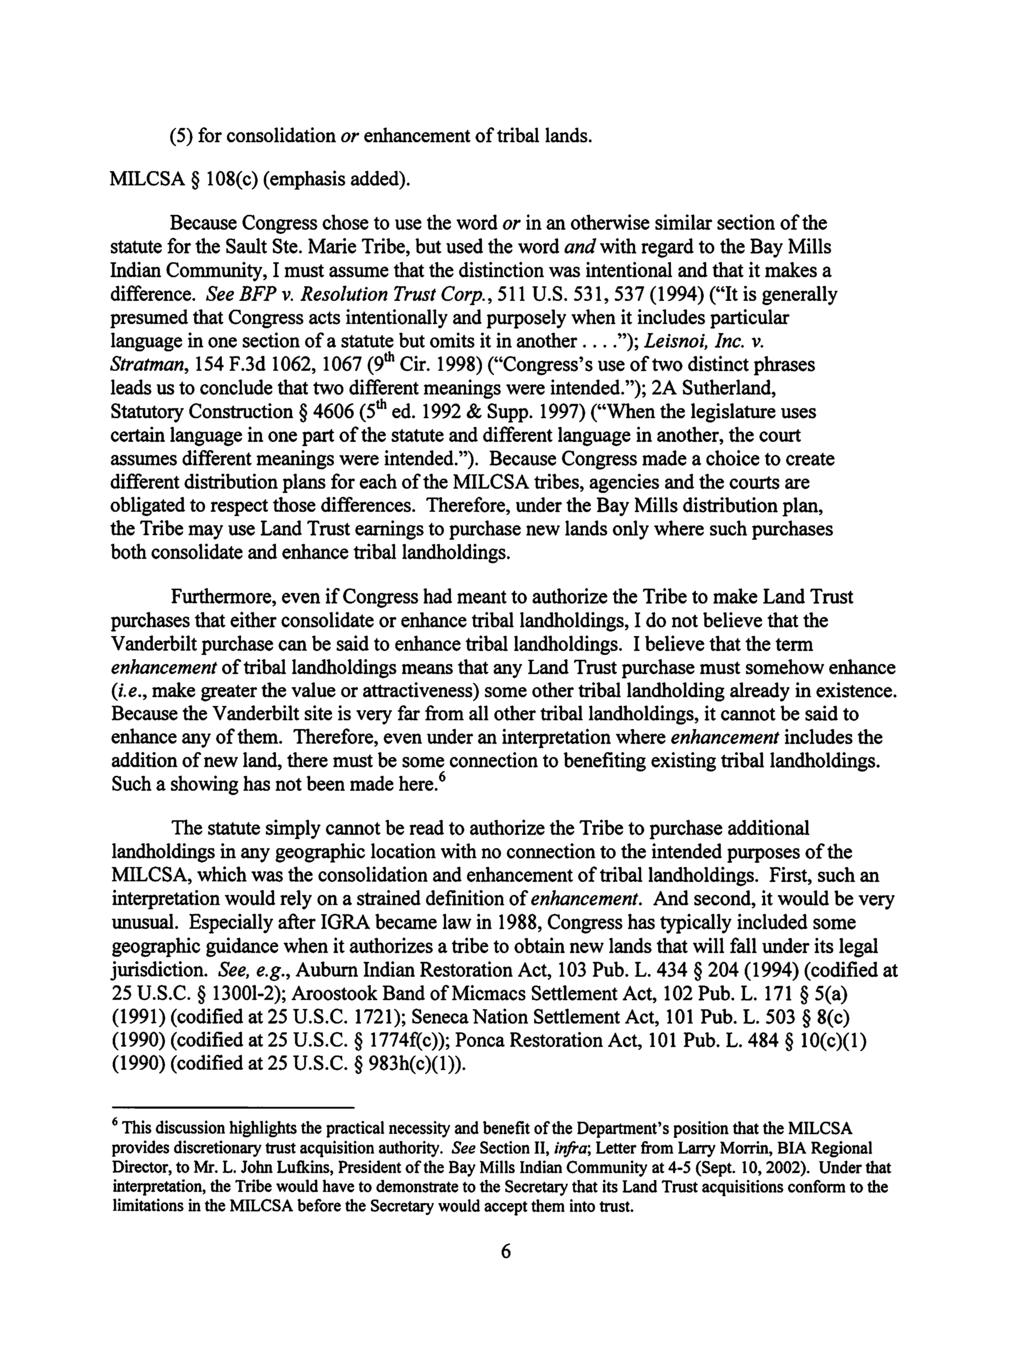 Case 1:18-cv-02035-TNM Document 1-1 Filed 08/30/18 Page 7 of 17 (5) for consolidation or enhancement of tribal lands. MILCSA 5 108(c) (emphasis added).